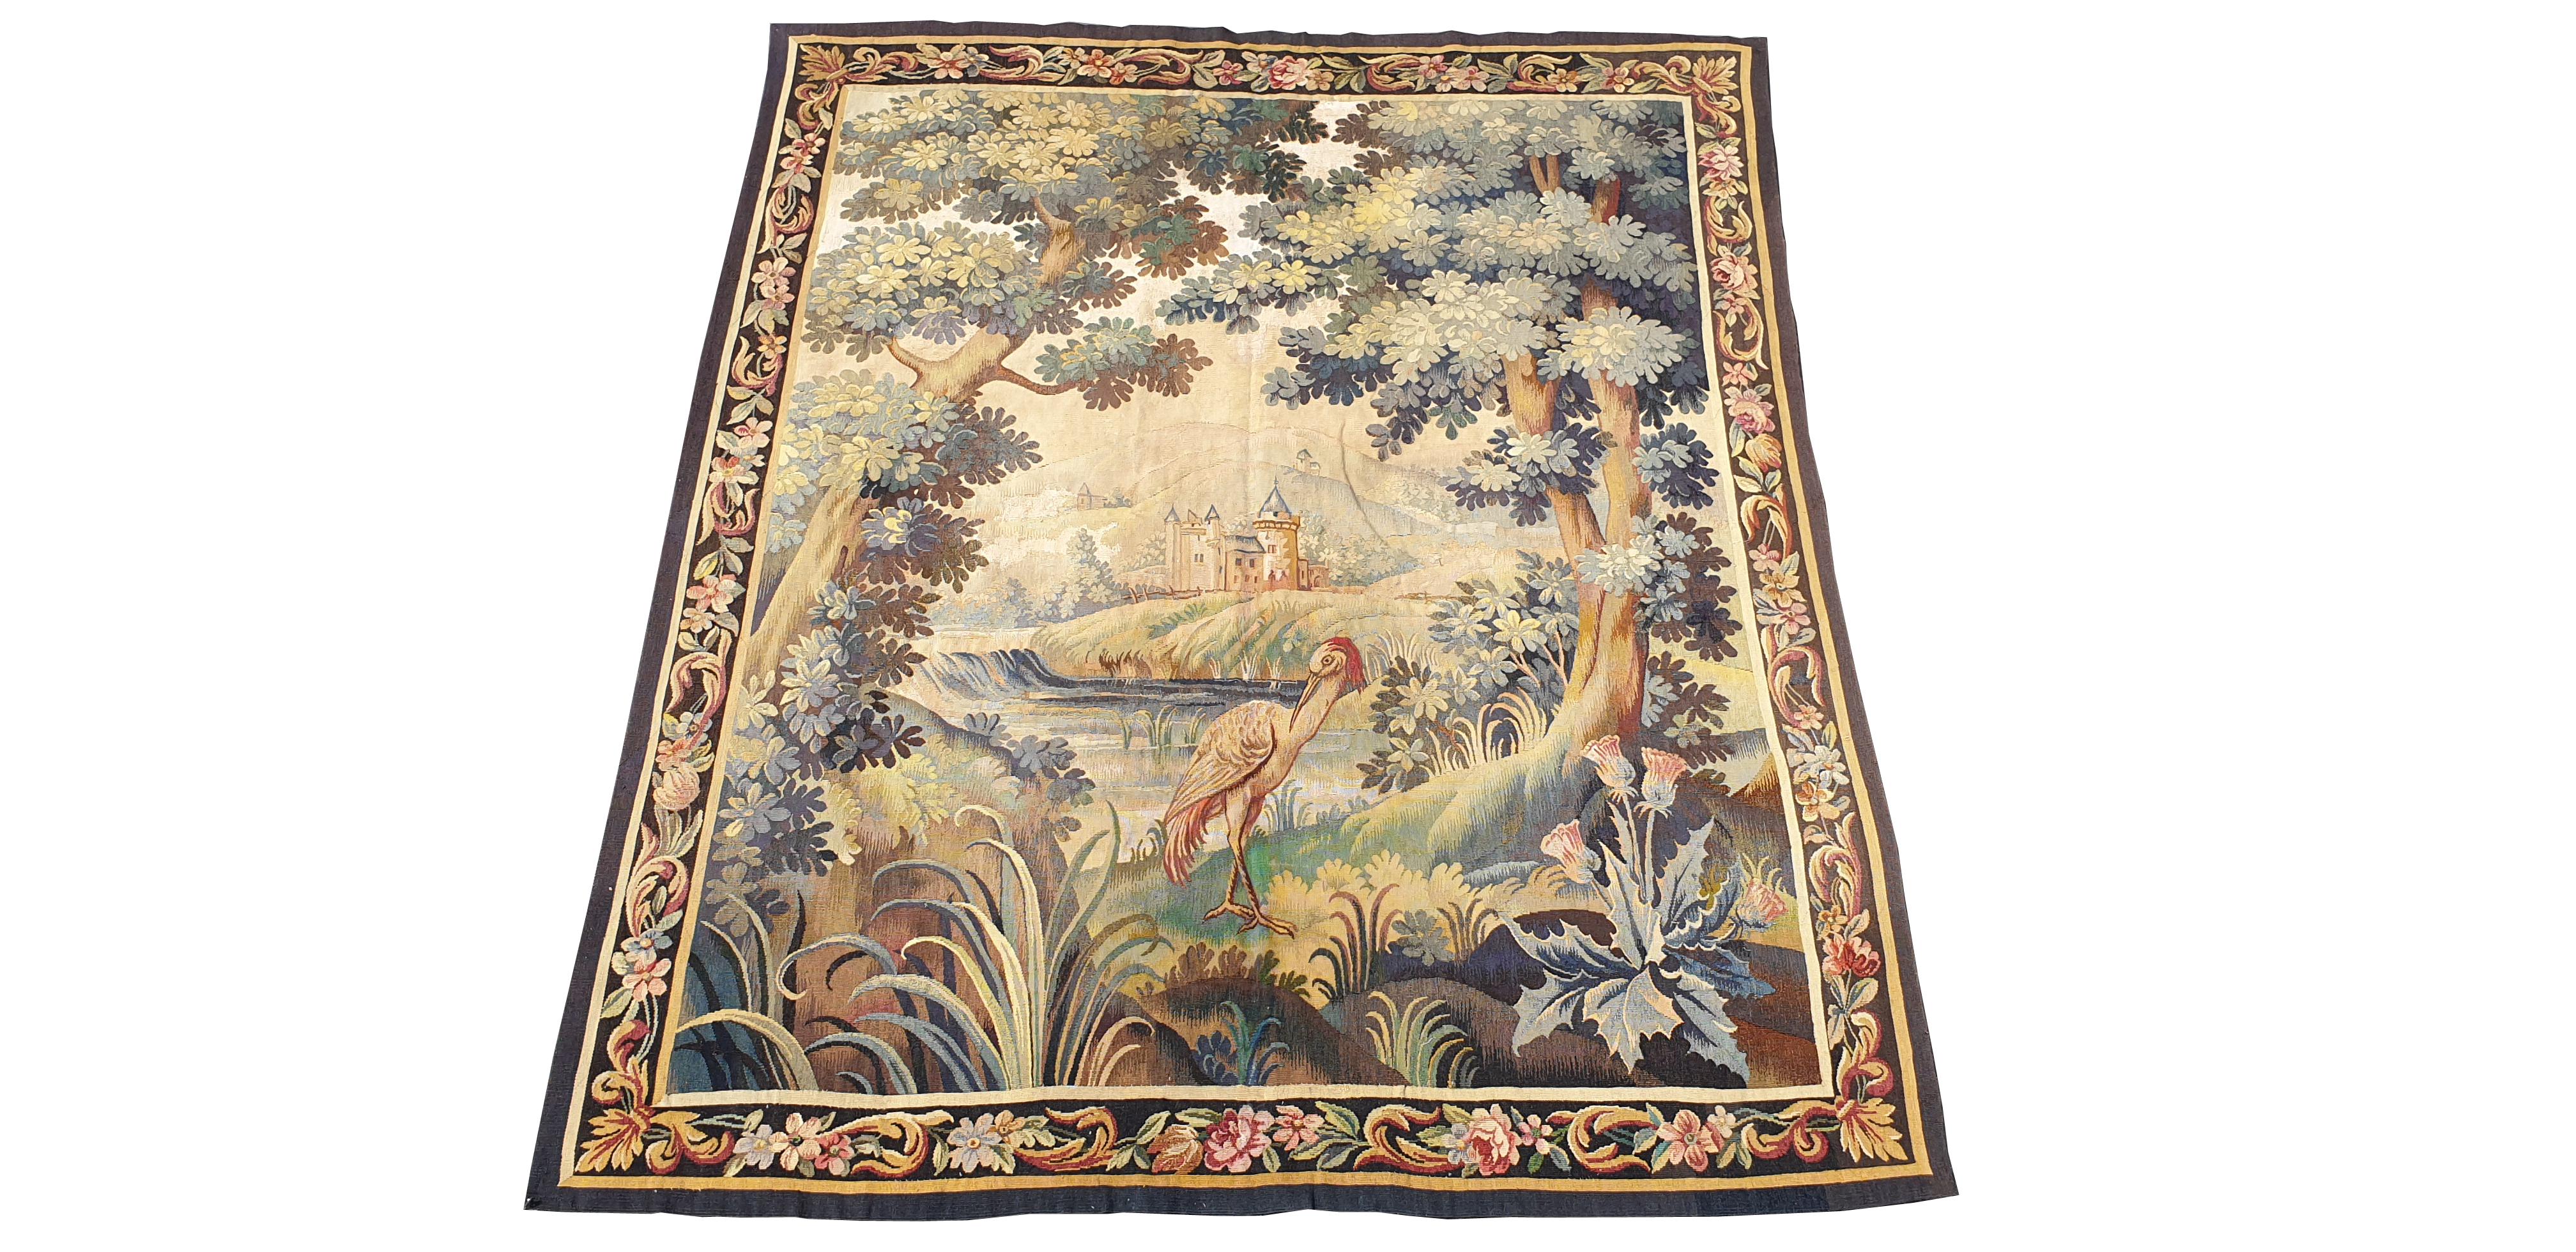 Tapestry of the Royal Manufacture of Aubusson of the 19th century.
Perfect state of preservation.
Reinforced by a fabric on the back of the work.
Price negotiable and free delivery.

Dimension: 210 cm x 180 cm.
 